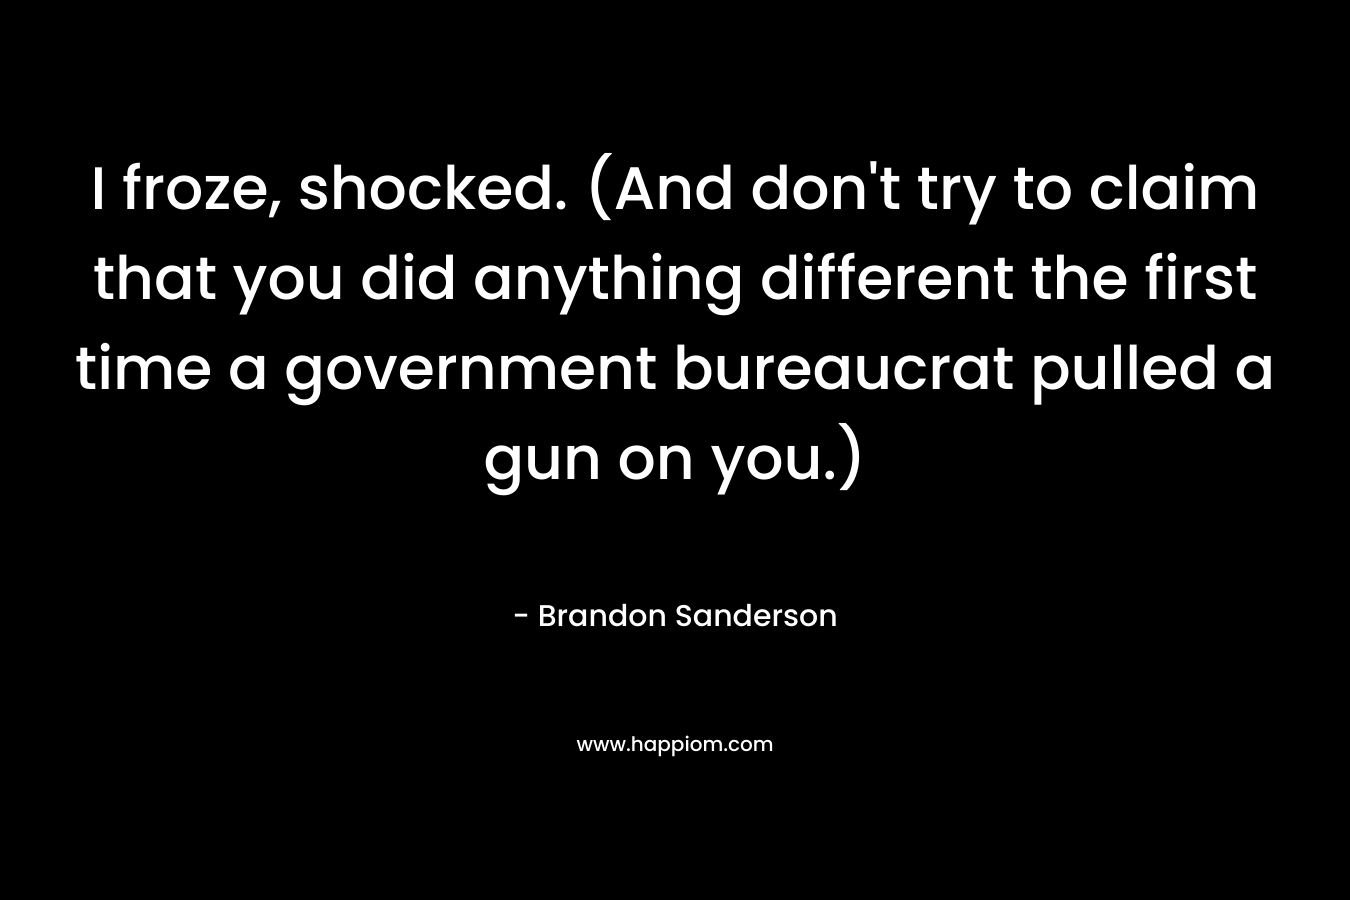 I froze, shocked. (And don't try to claim that you did anything different the first time a government bureaucrat pulled a gun on you.)